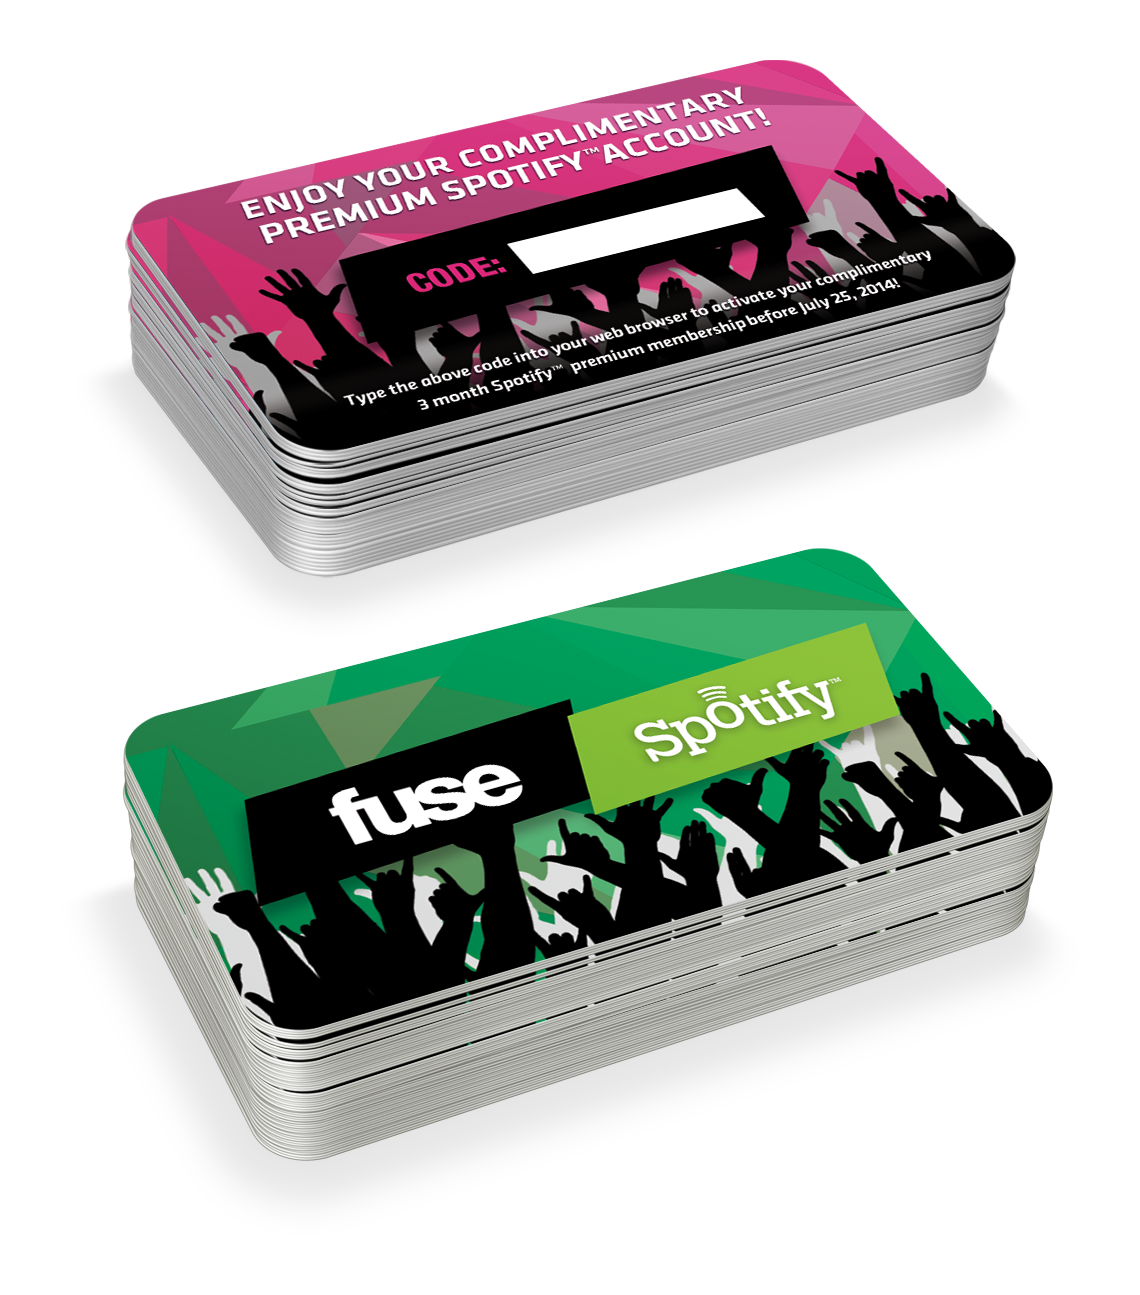 Music Festival fuse concert spotify html email catalog promo cards